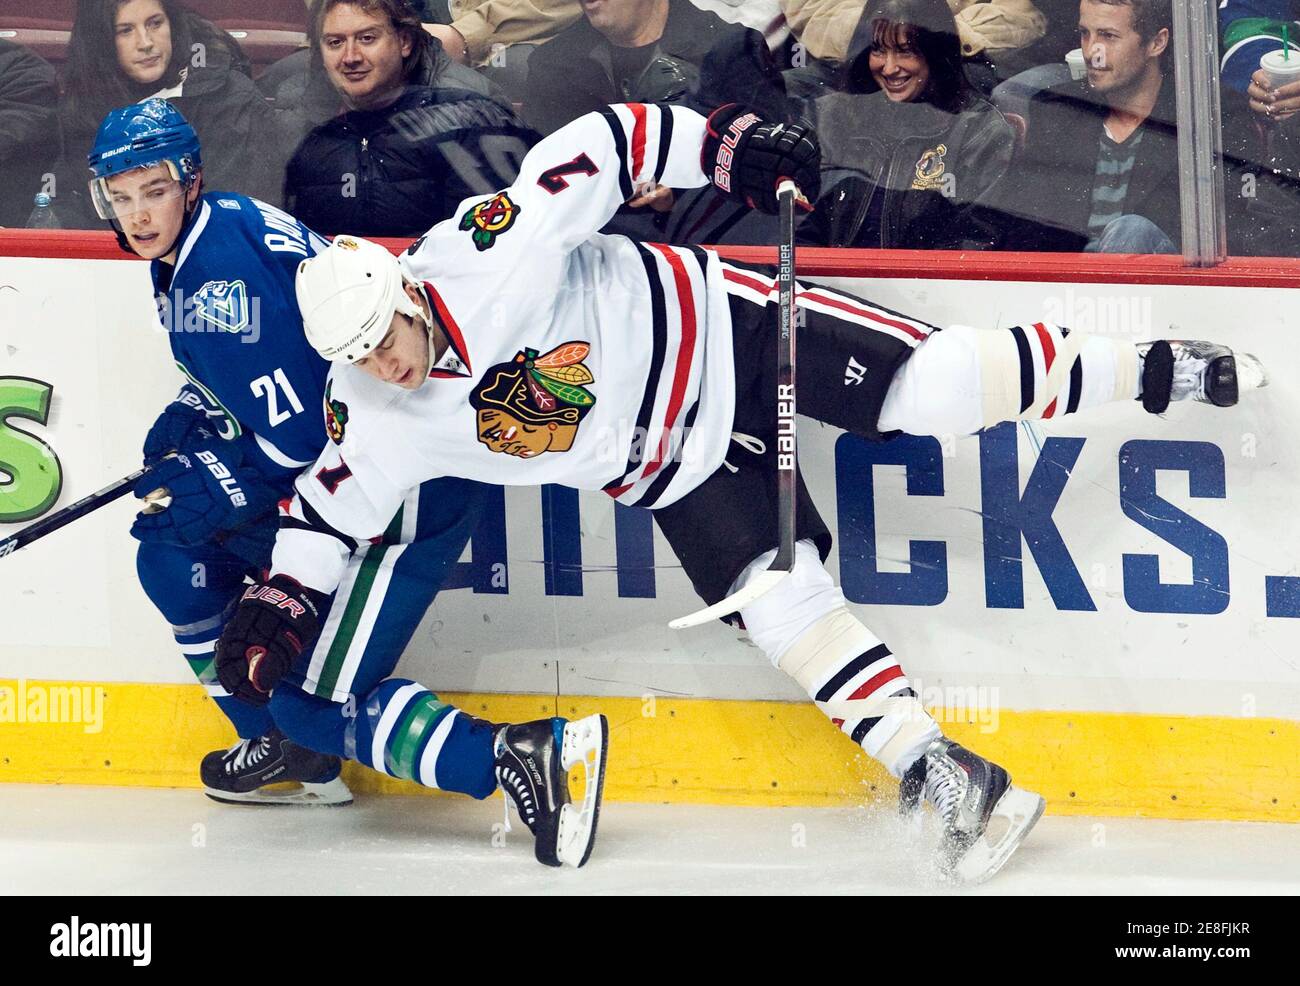 Chicago Blackhawks' Brent Seabrook (R) and Vancouver Canucks' Mason Raymond collide during second period NHL hockey in Vancouver, British Columbia November 22, 2009.          REUTERS/Andy Clark     (CANADA SPORT ICE HOCKEY) Stock Photo